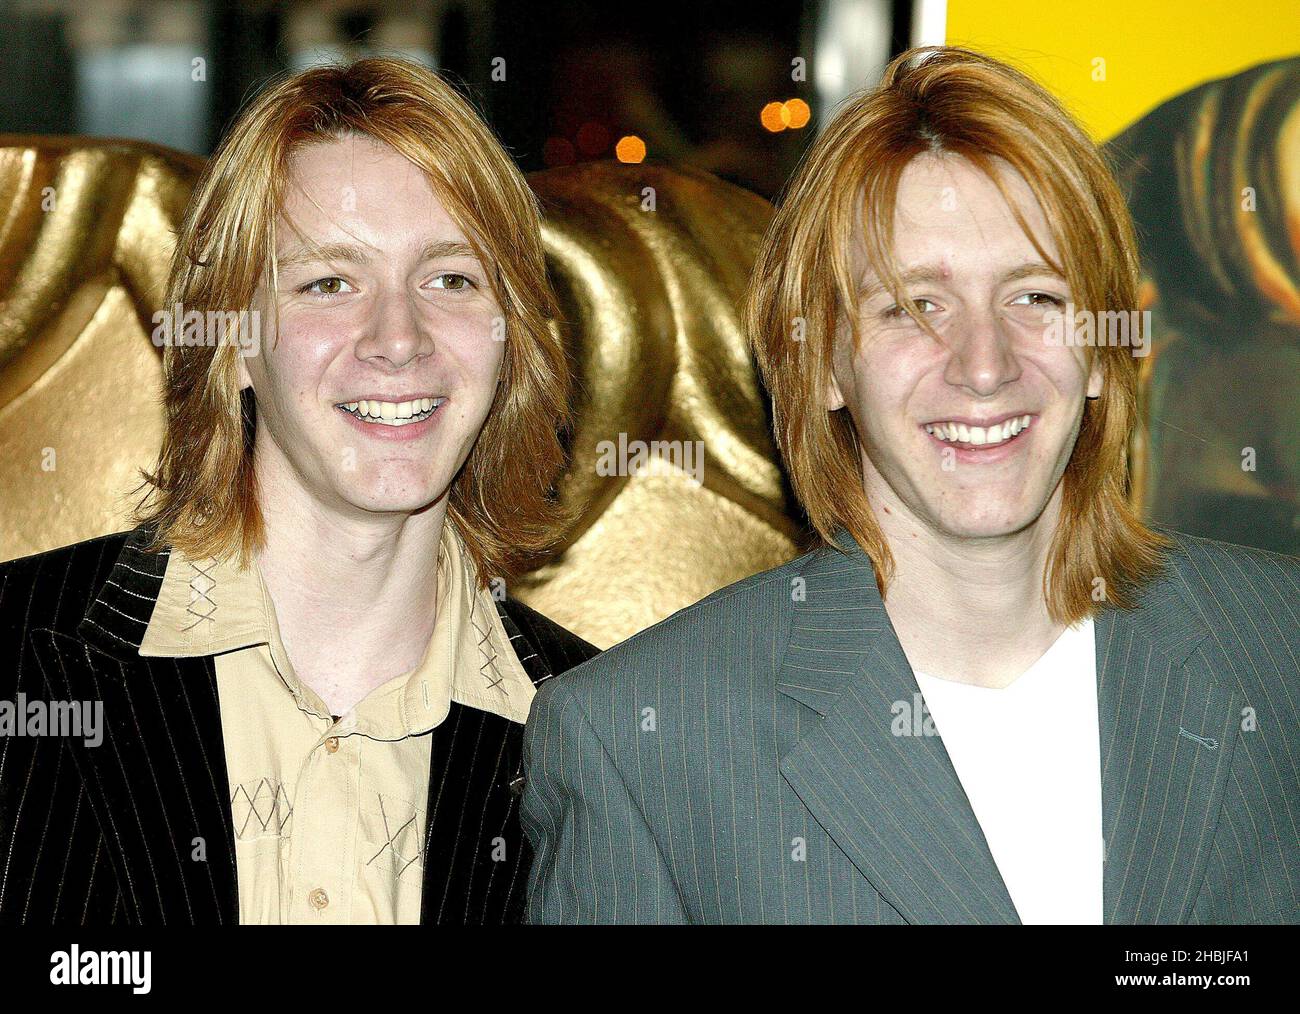 Jamie and Oliver Phelps pose at arrivals at the 'British Academy Children's Film & Television Awards' at the London Hilton, Park Lane on November 27, 2004 in London. Stock Photo